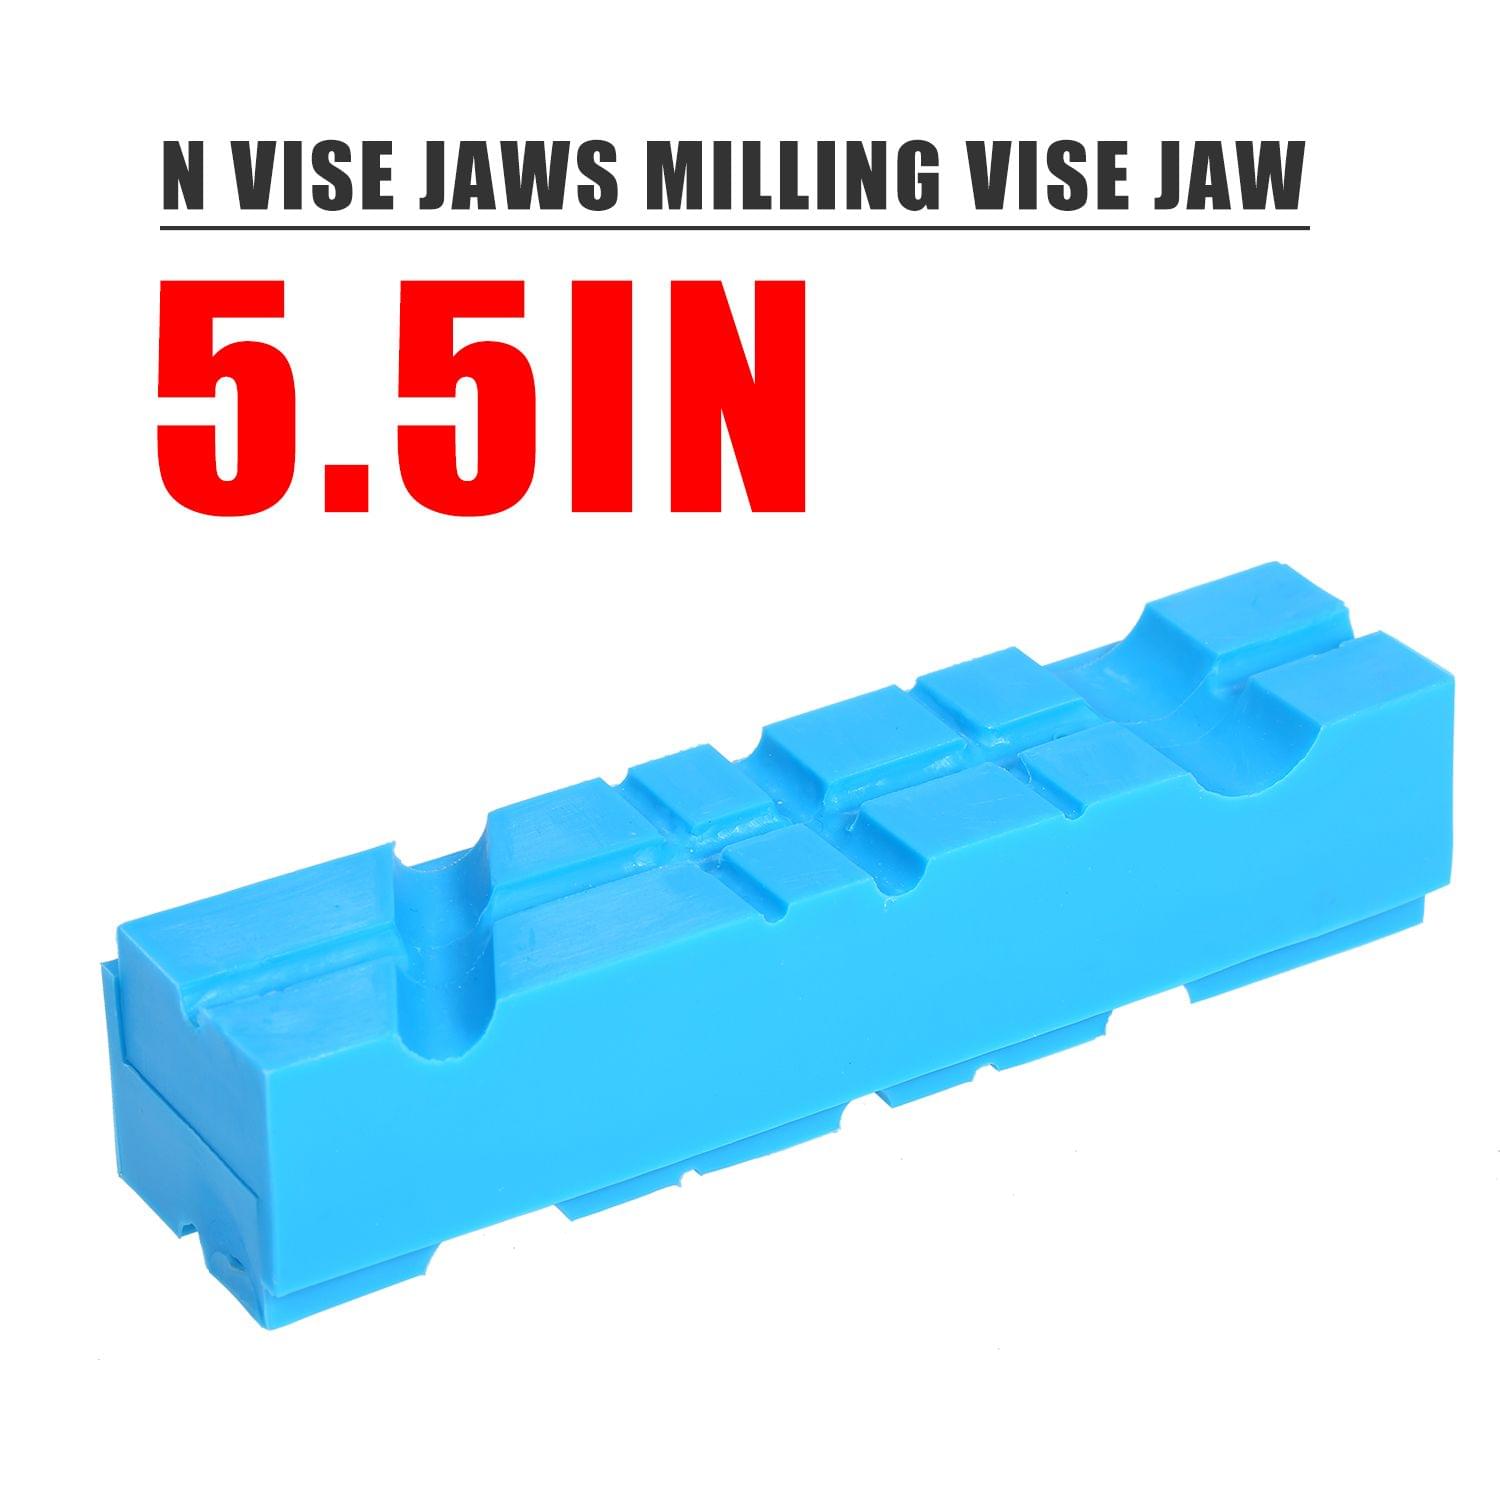 5.5In Vise Jaws Milling Vise Jaw Clamps with Magnetic Nylon